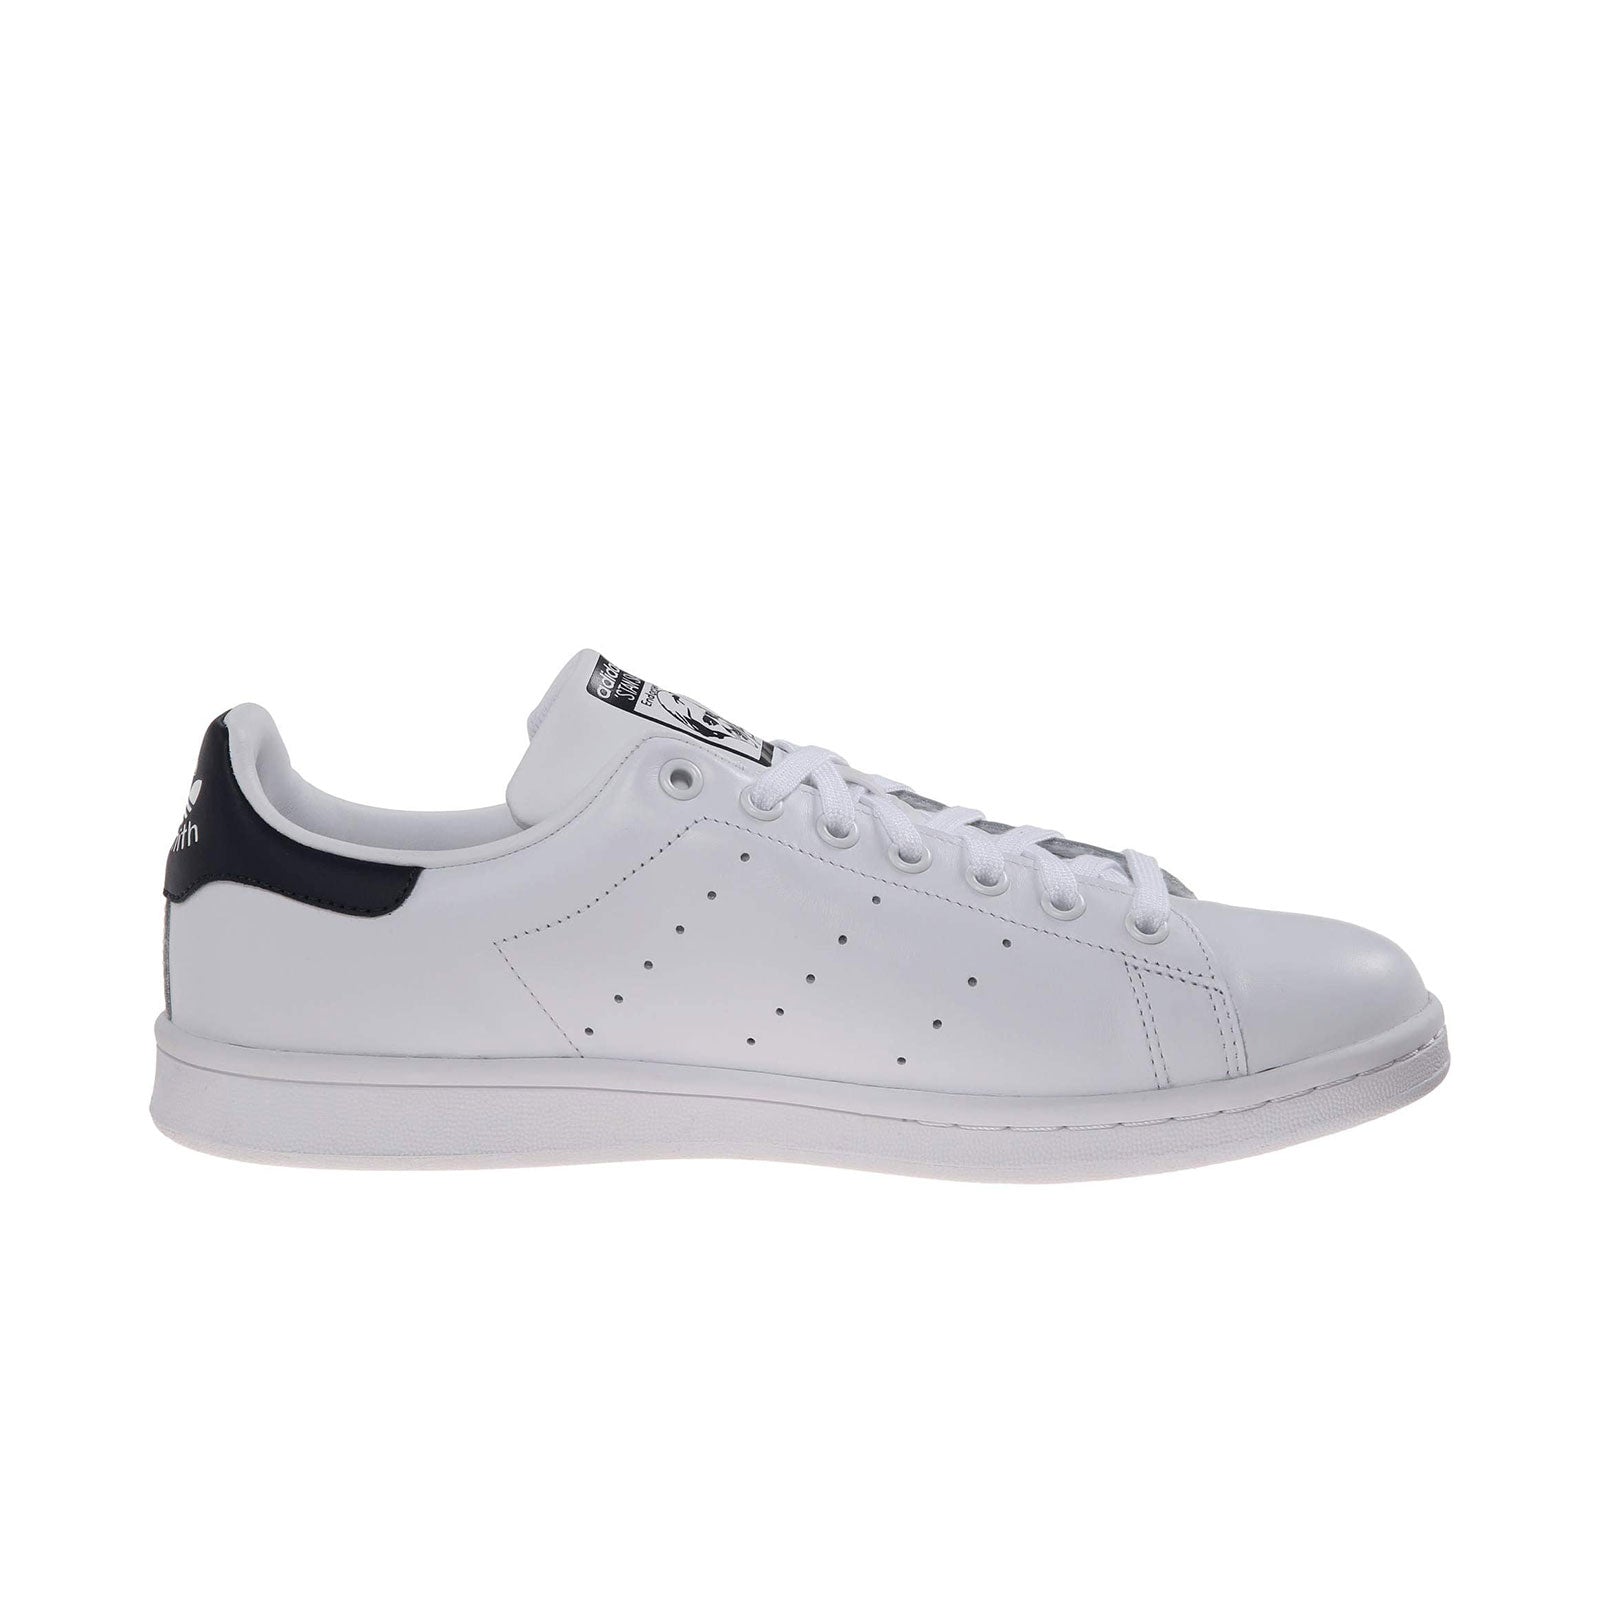 adidas originals stan smith leather trainers m20325